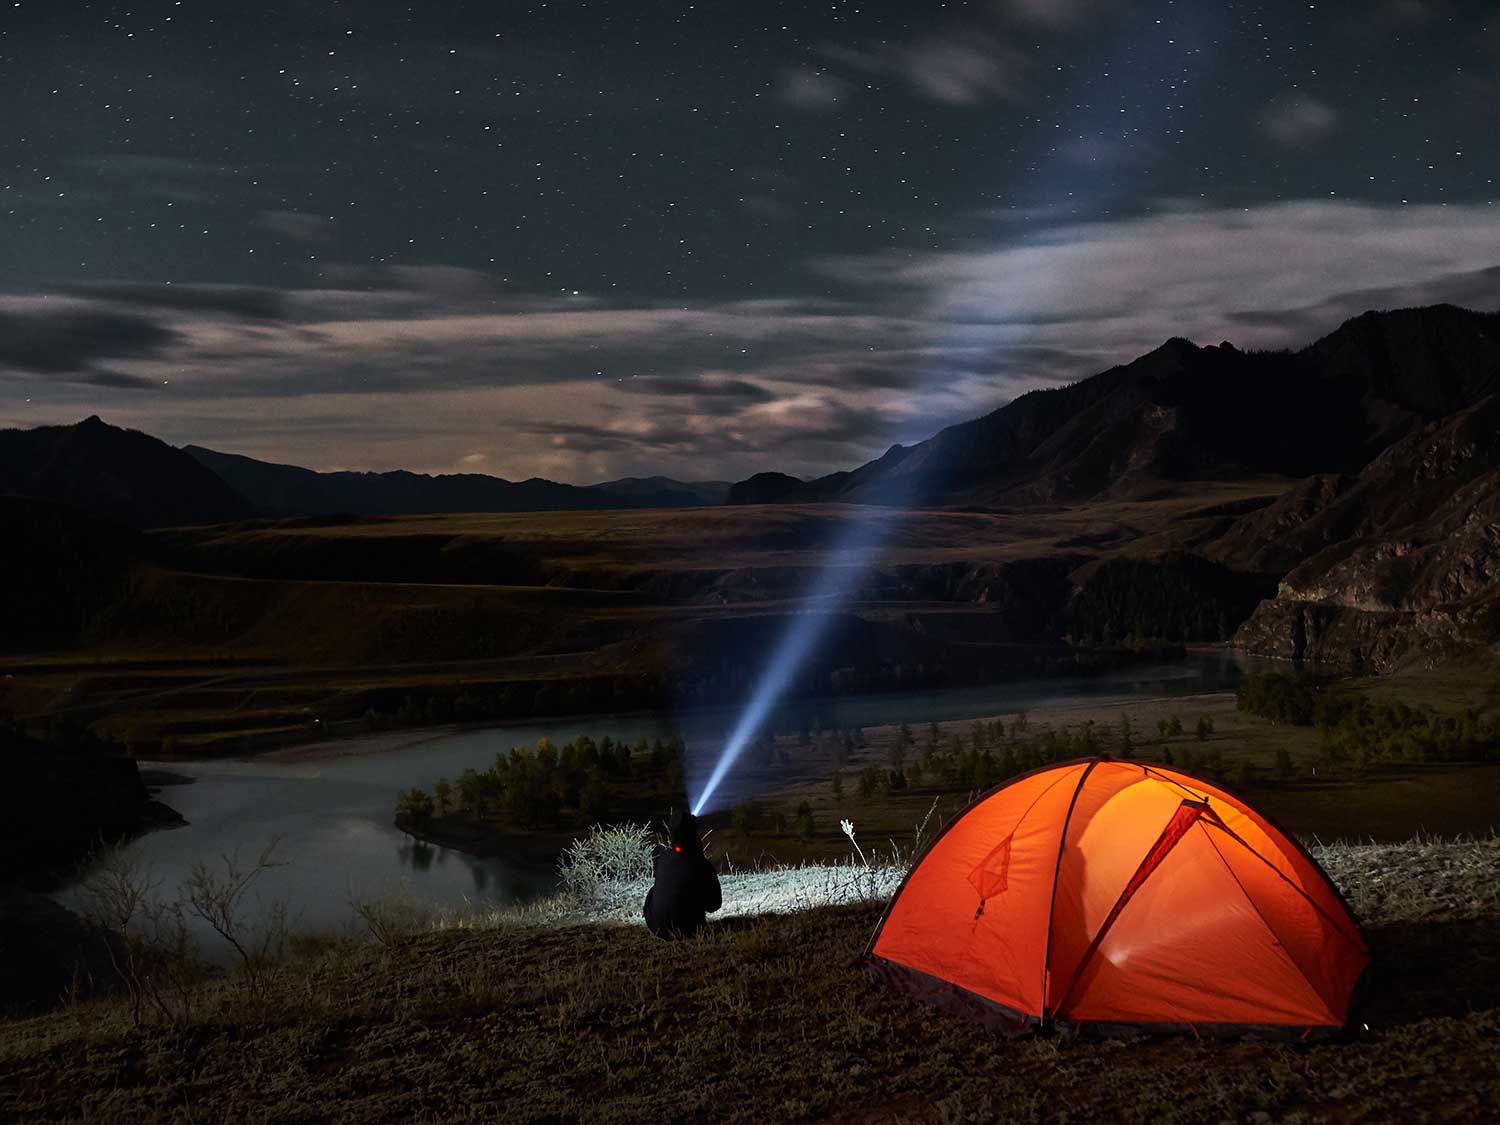 Camping at night with a flashlight